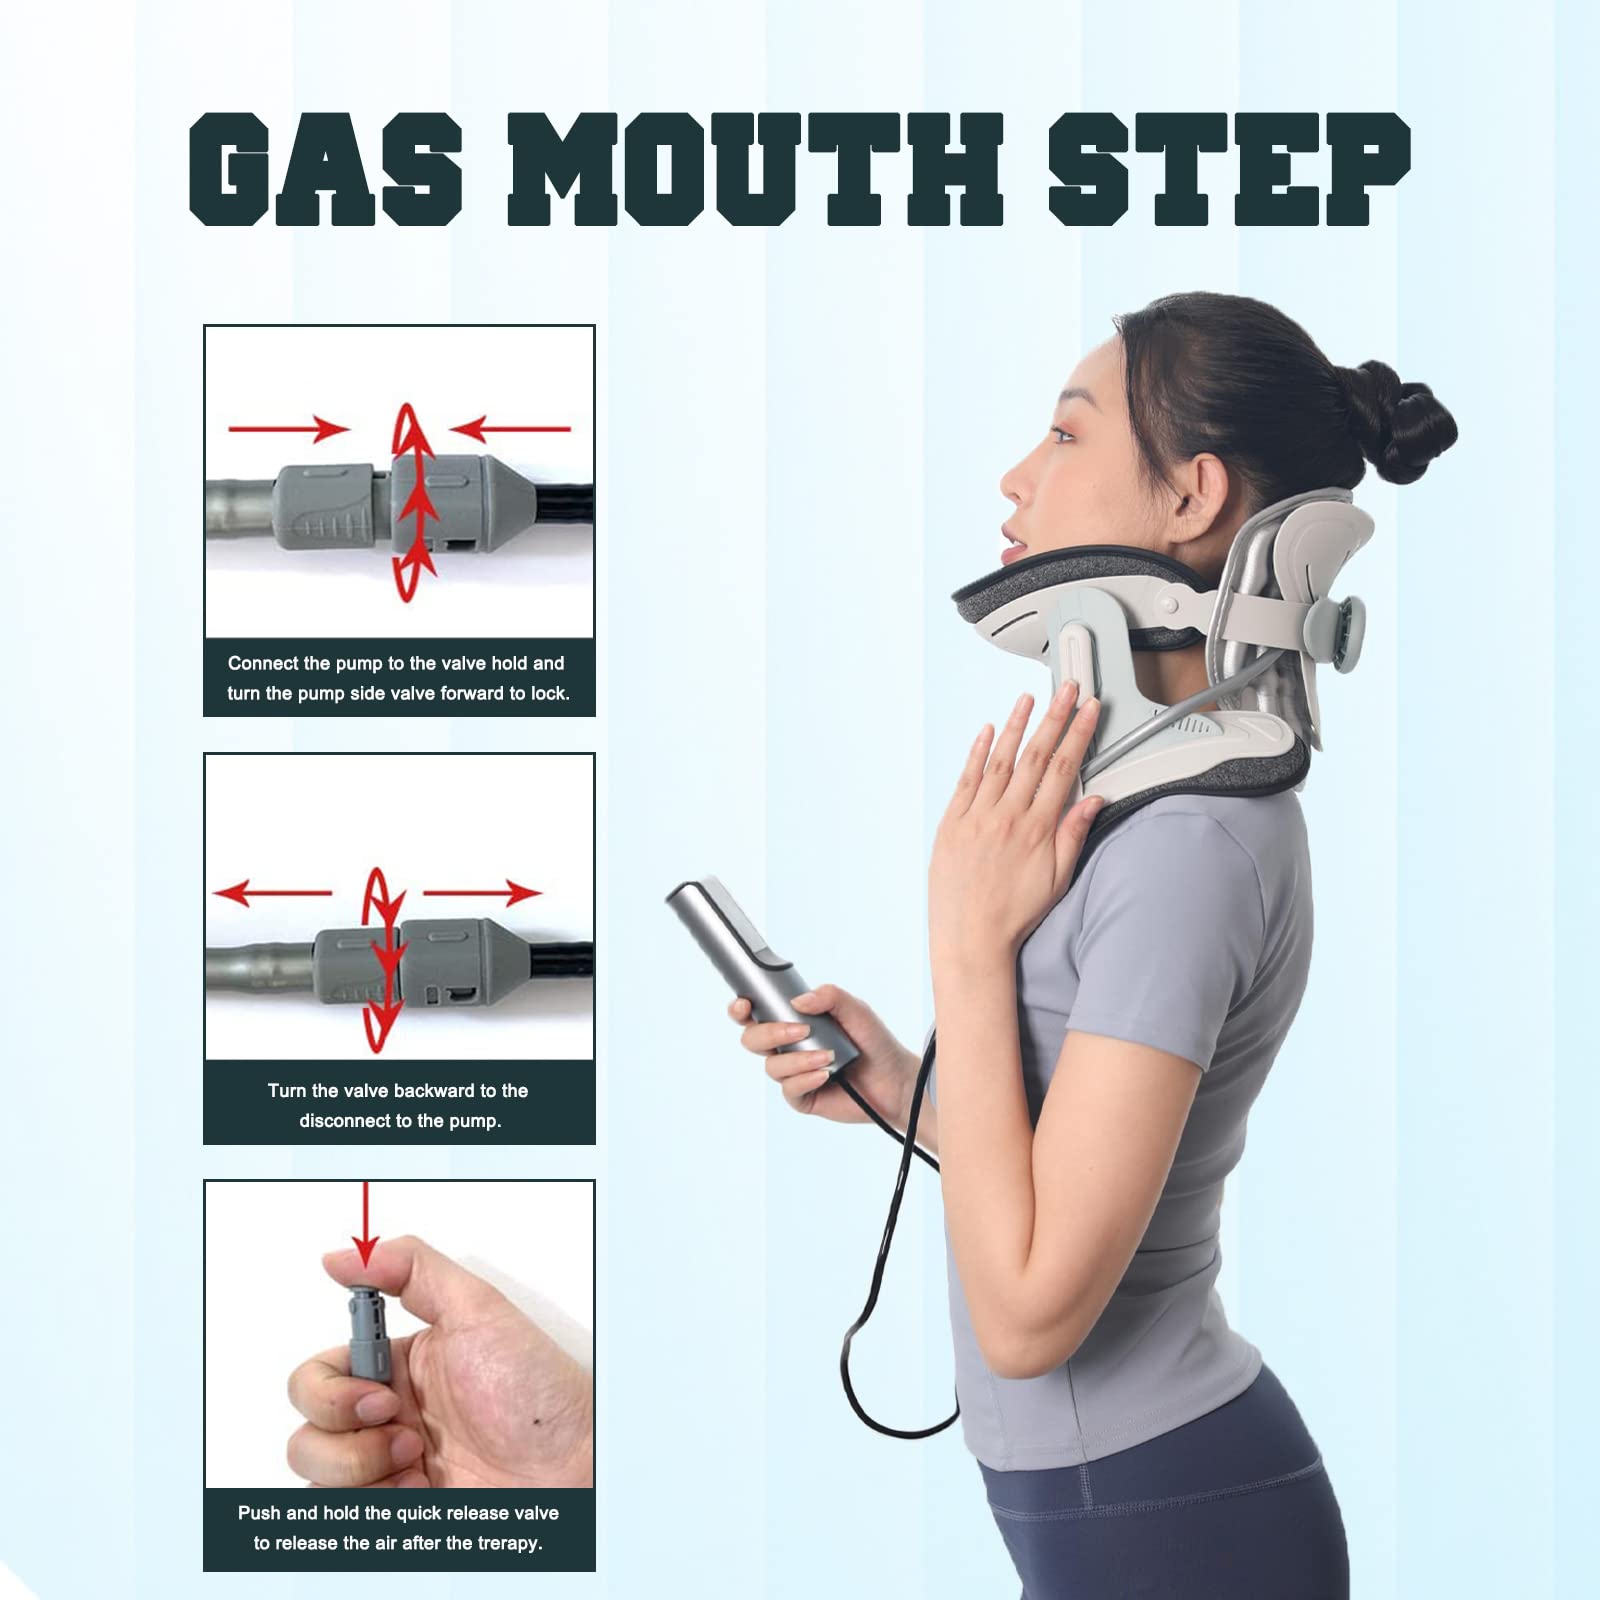 Cervical Neck Traction Device,Electric Air Pump Neck Stretcher Cervical Traction Device,with 3 Power Traction and 8 Airbag Support,Neck Brace which Decompresses the Neck and Relieves Neck Tension